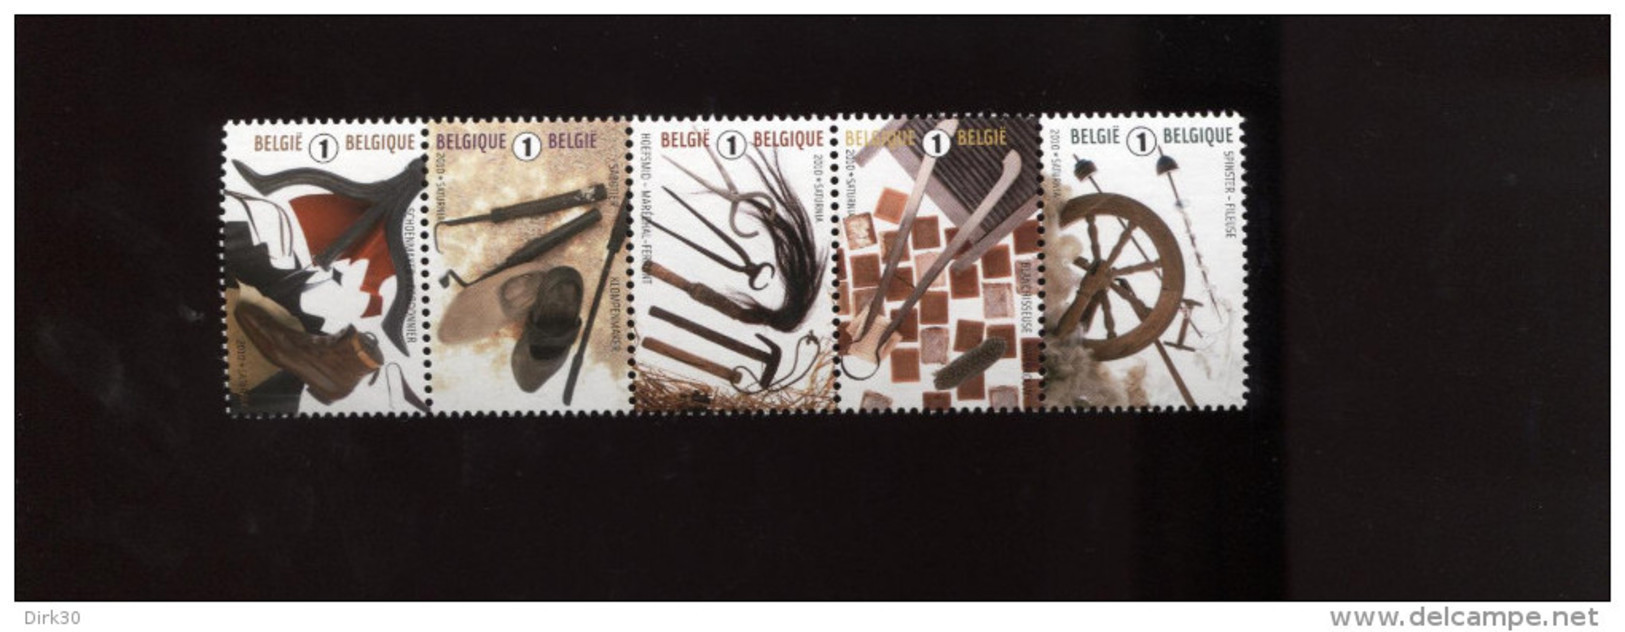 Belgie 4079/83 Beroepen Professions Craft Spinning Shoe Smith STRIP Of 5 2010  MNH   Onder Faciaal Sous Faciale - Neufs